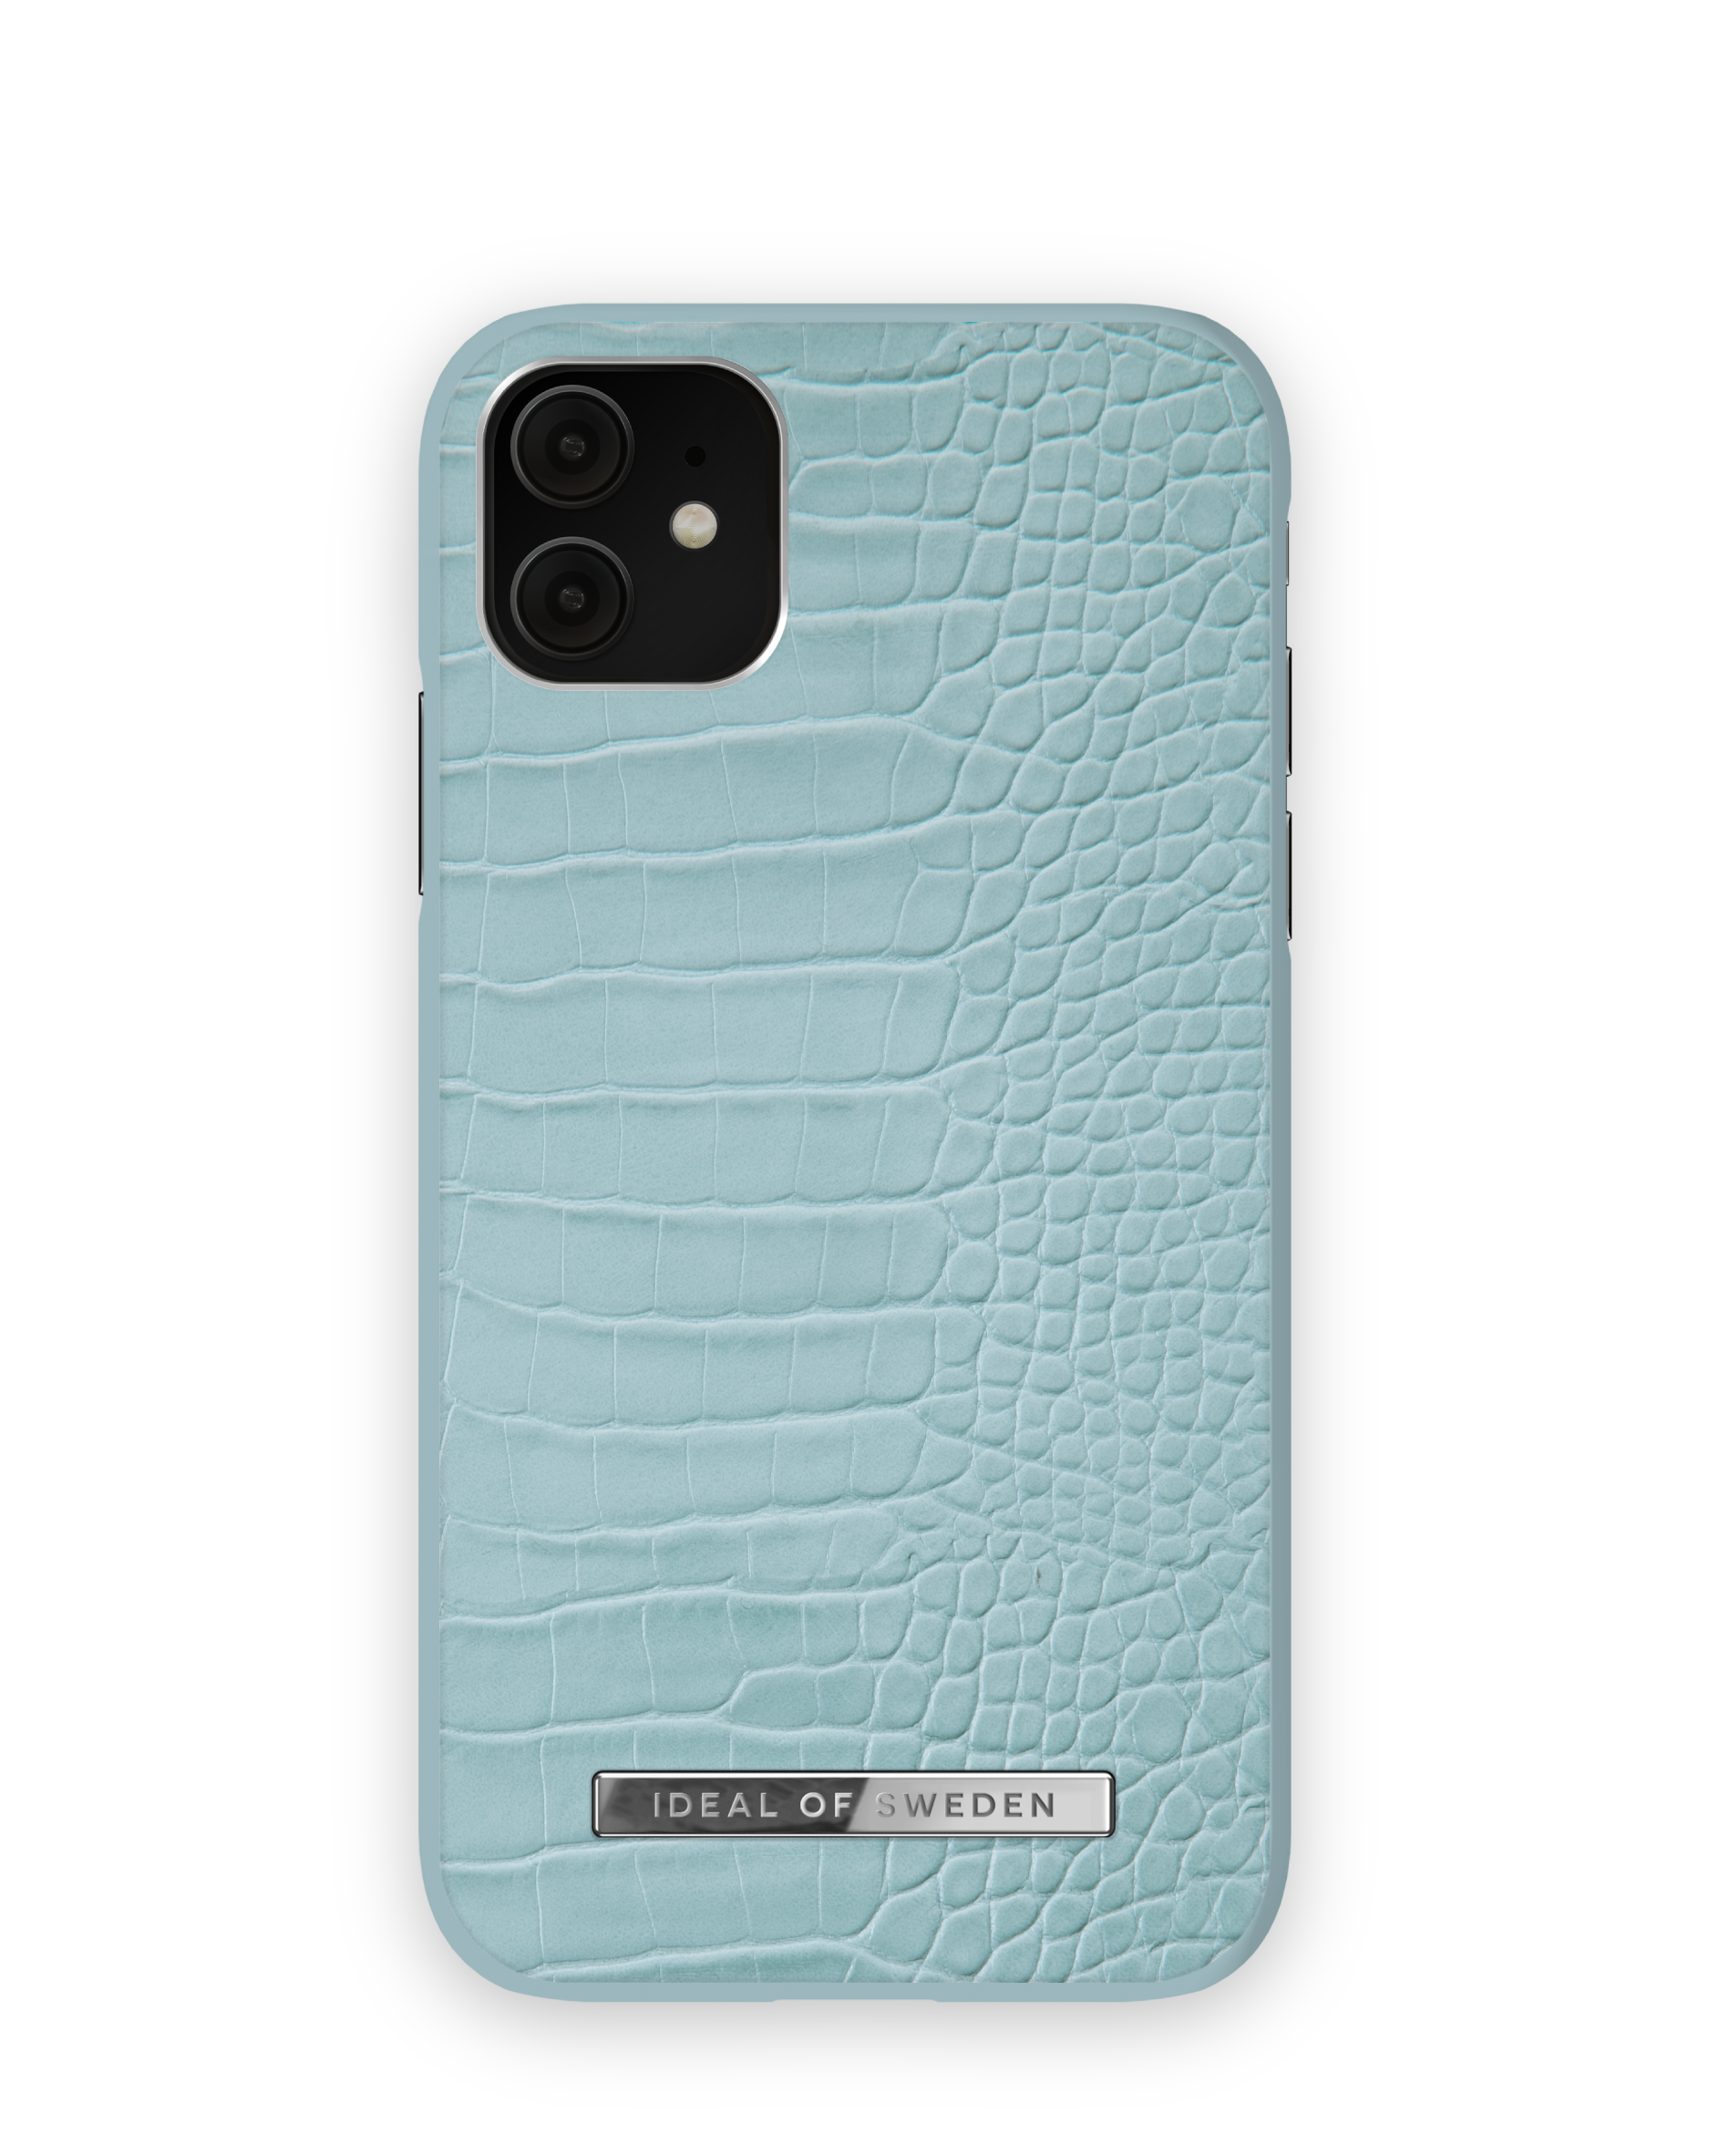 iPhone XR, Apple, SWEDEN IDACSS22-I1961-394, Croco iPhone OF Backcover, Blue Soft / IDEAL 11